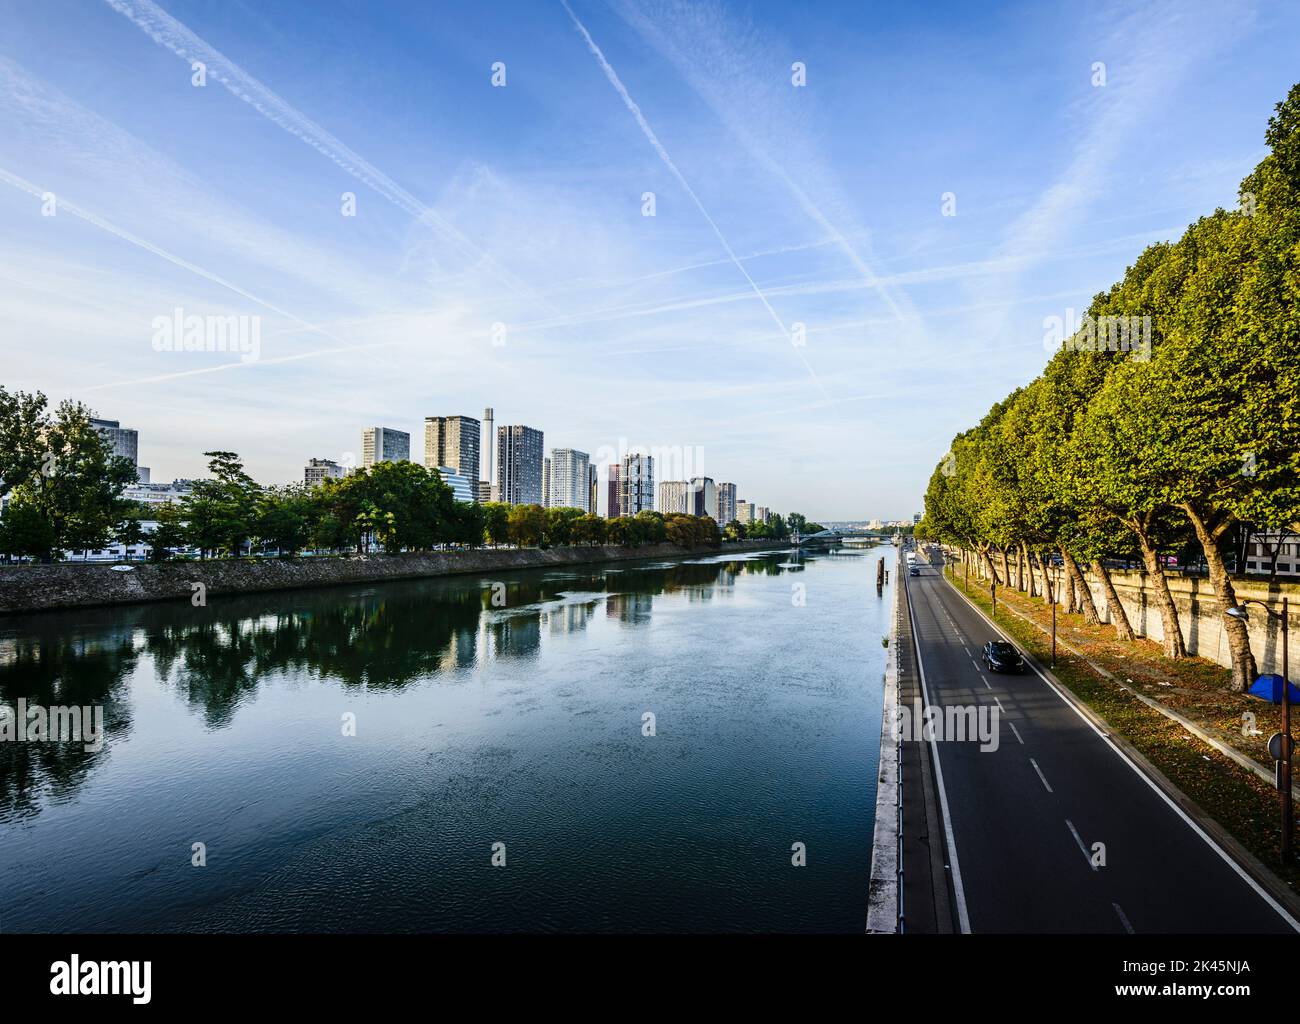 View along the River Seine, a road by the water, high rise buildings. Stock Photo